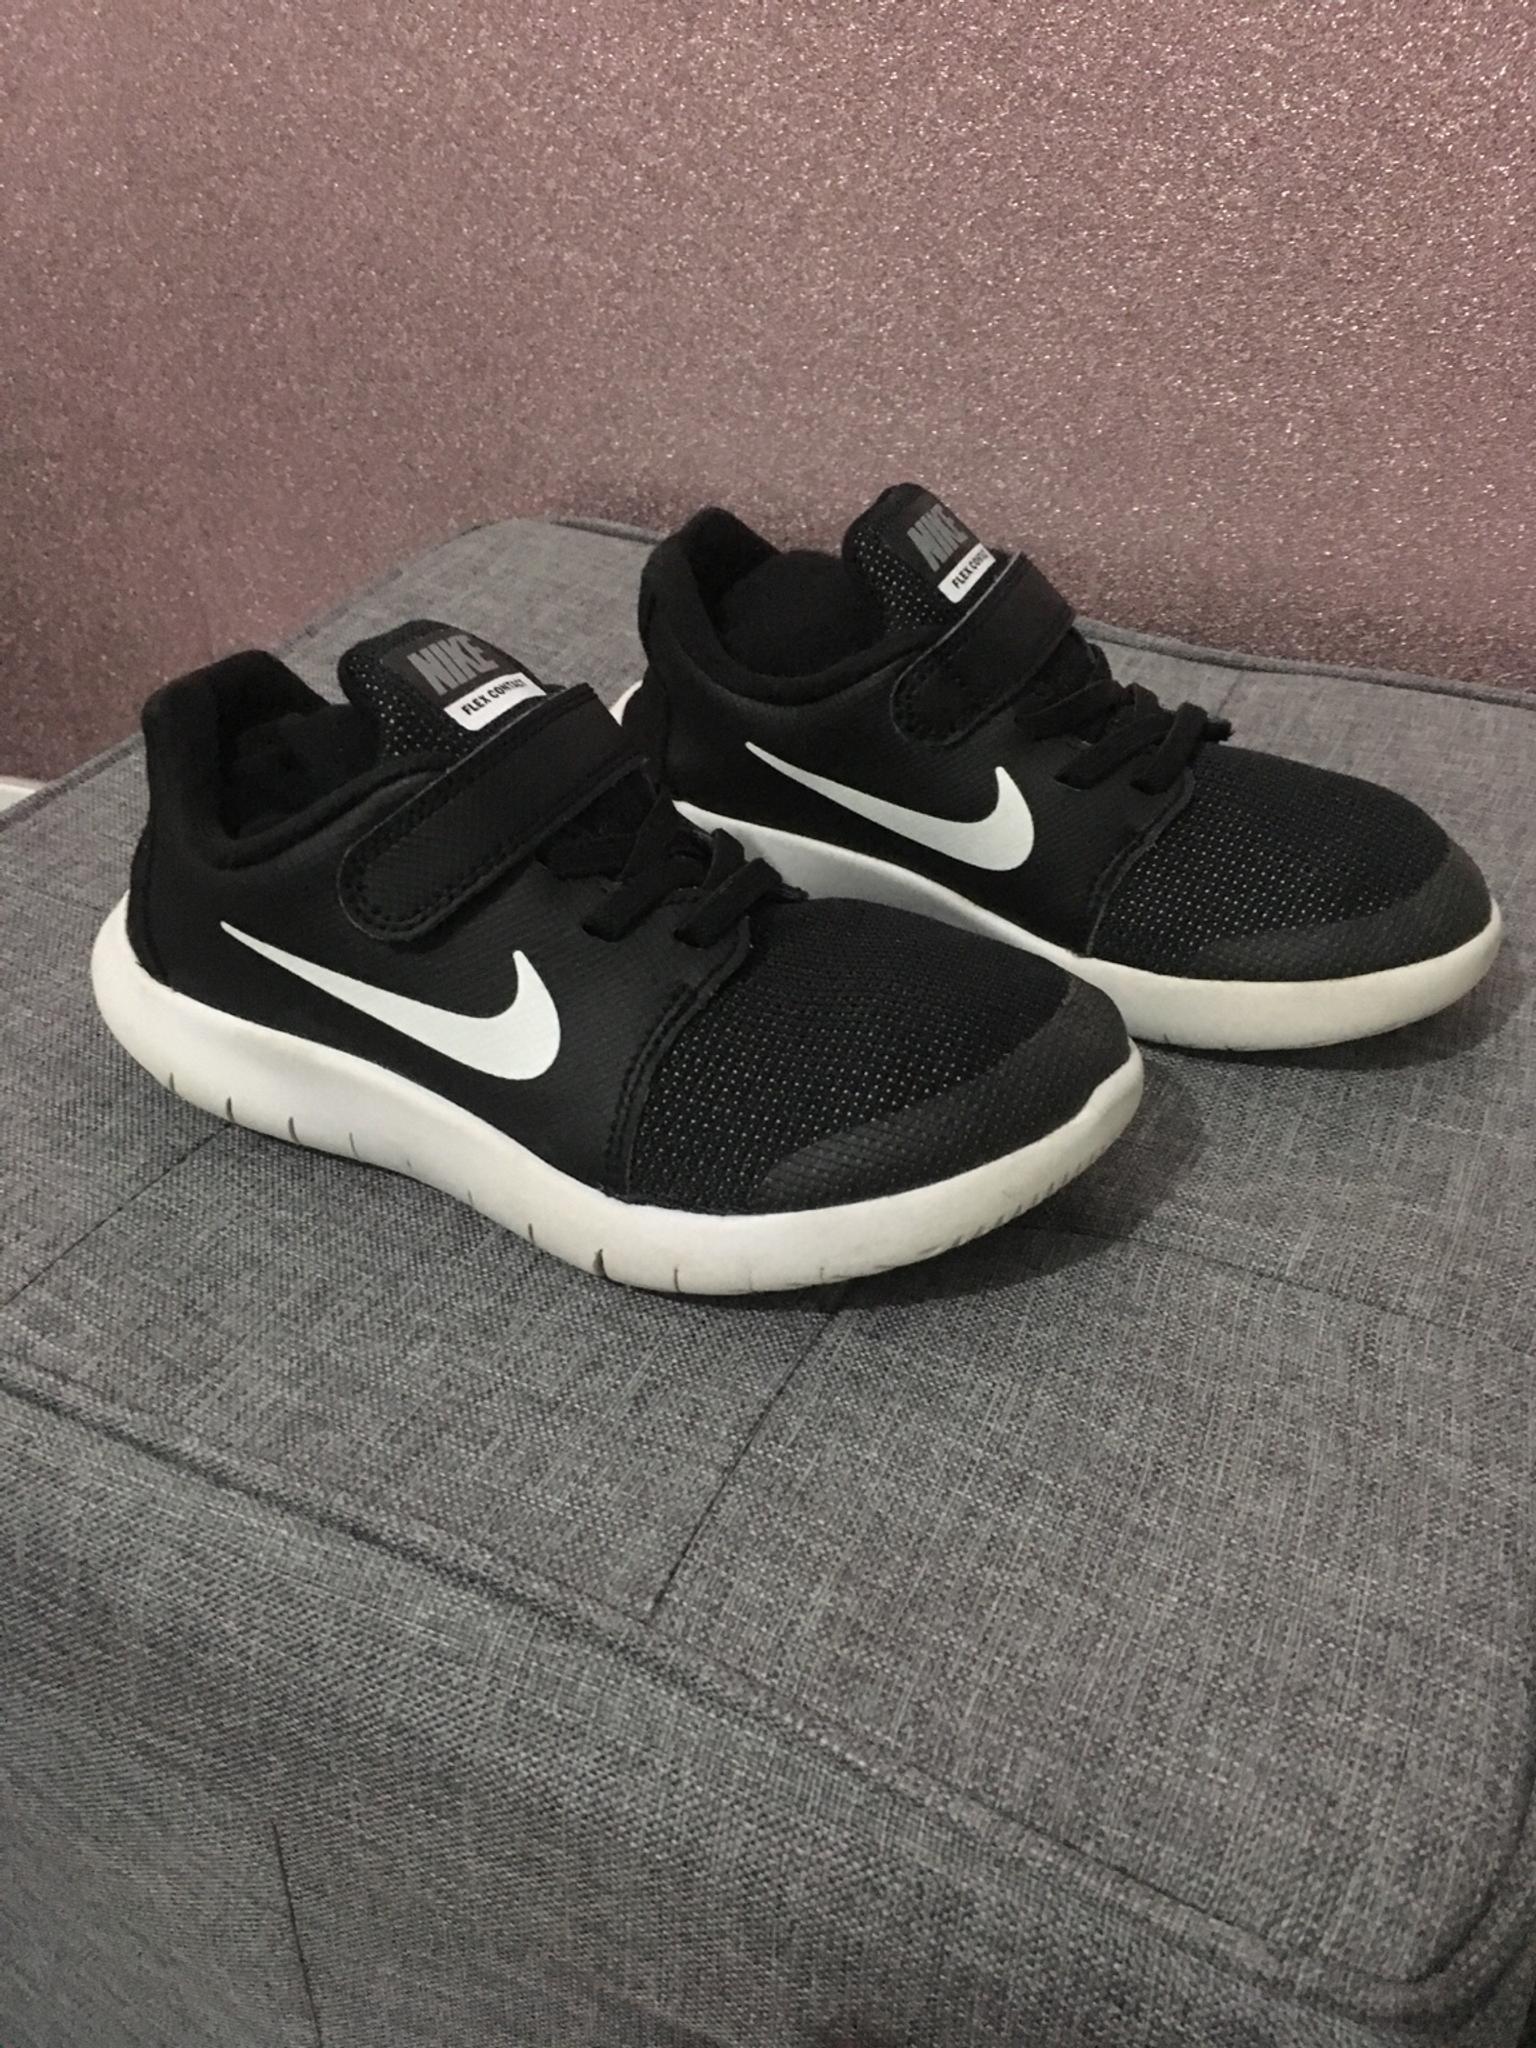 nike shoes with white sole